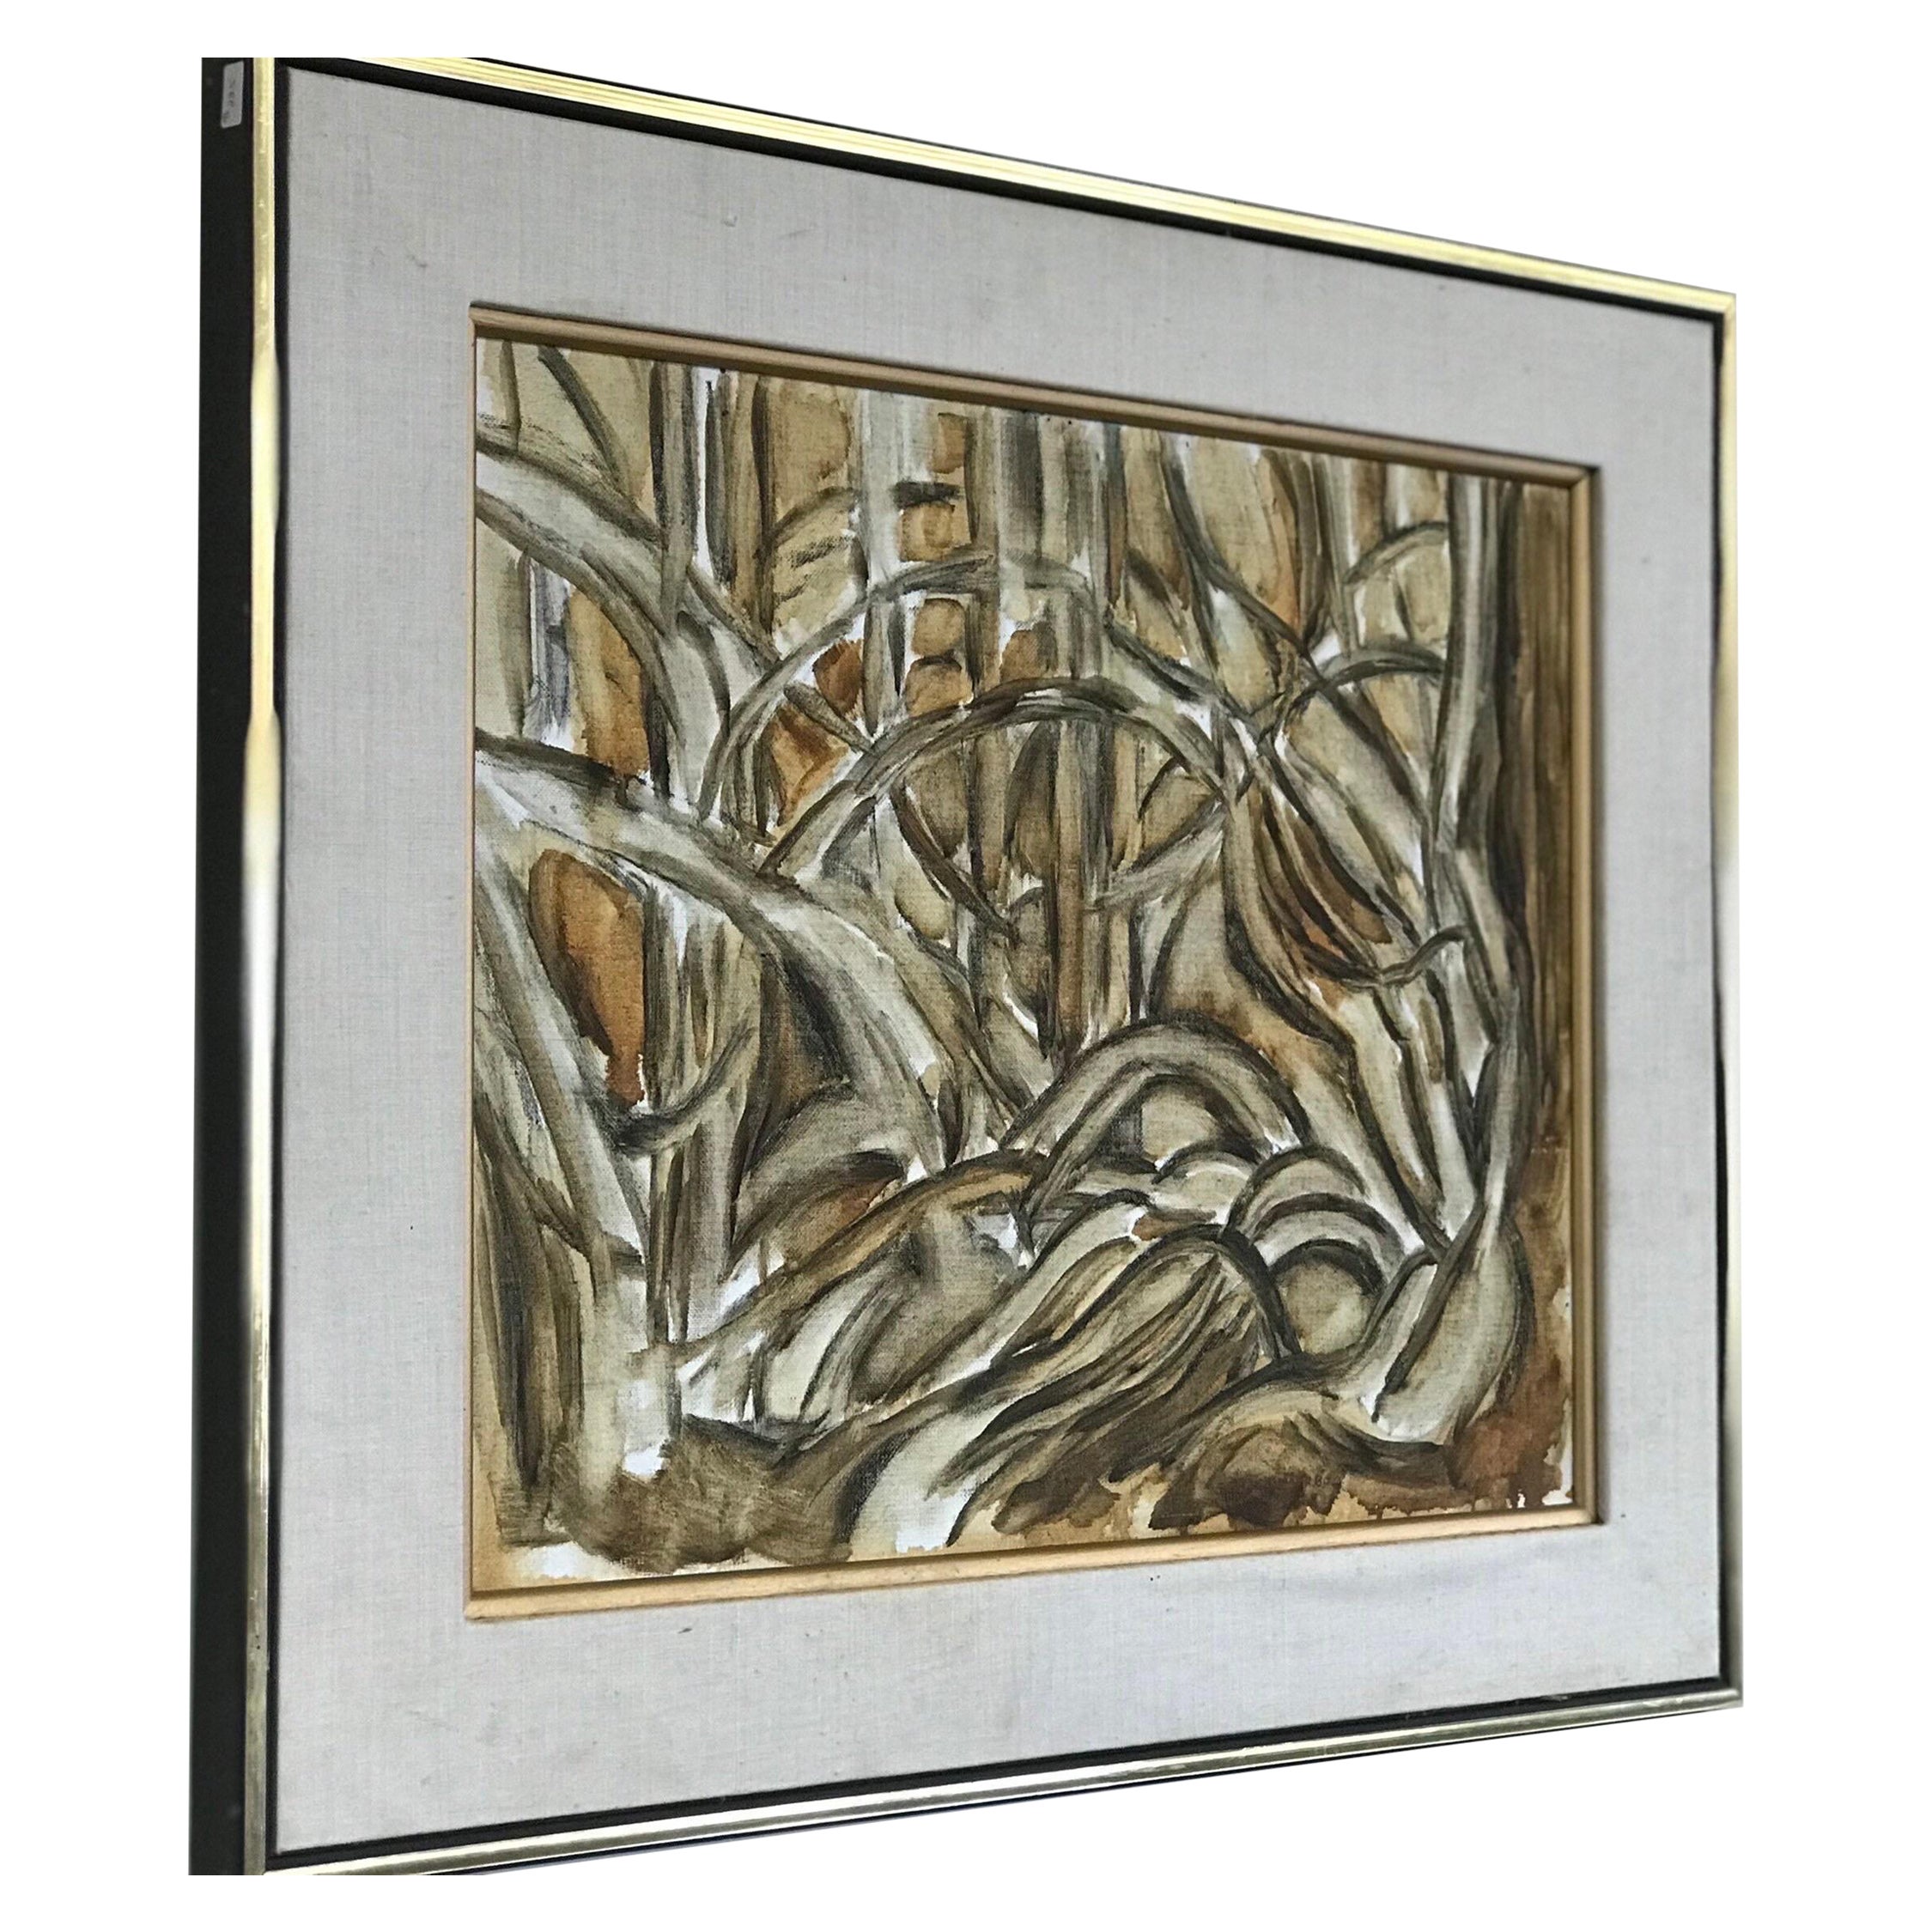 Vintage Mid-Century Modern Oil Painting Golden Tones Abstract Primitive Framed For Sale